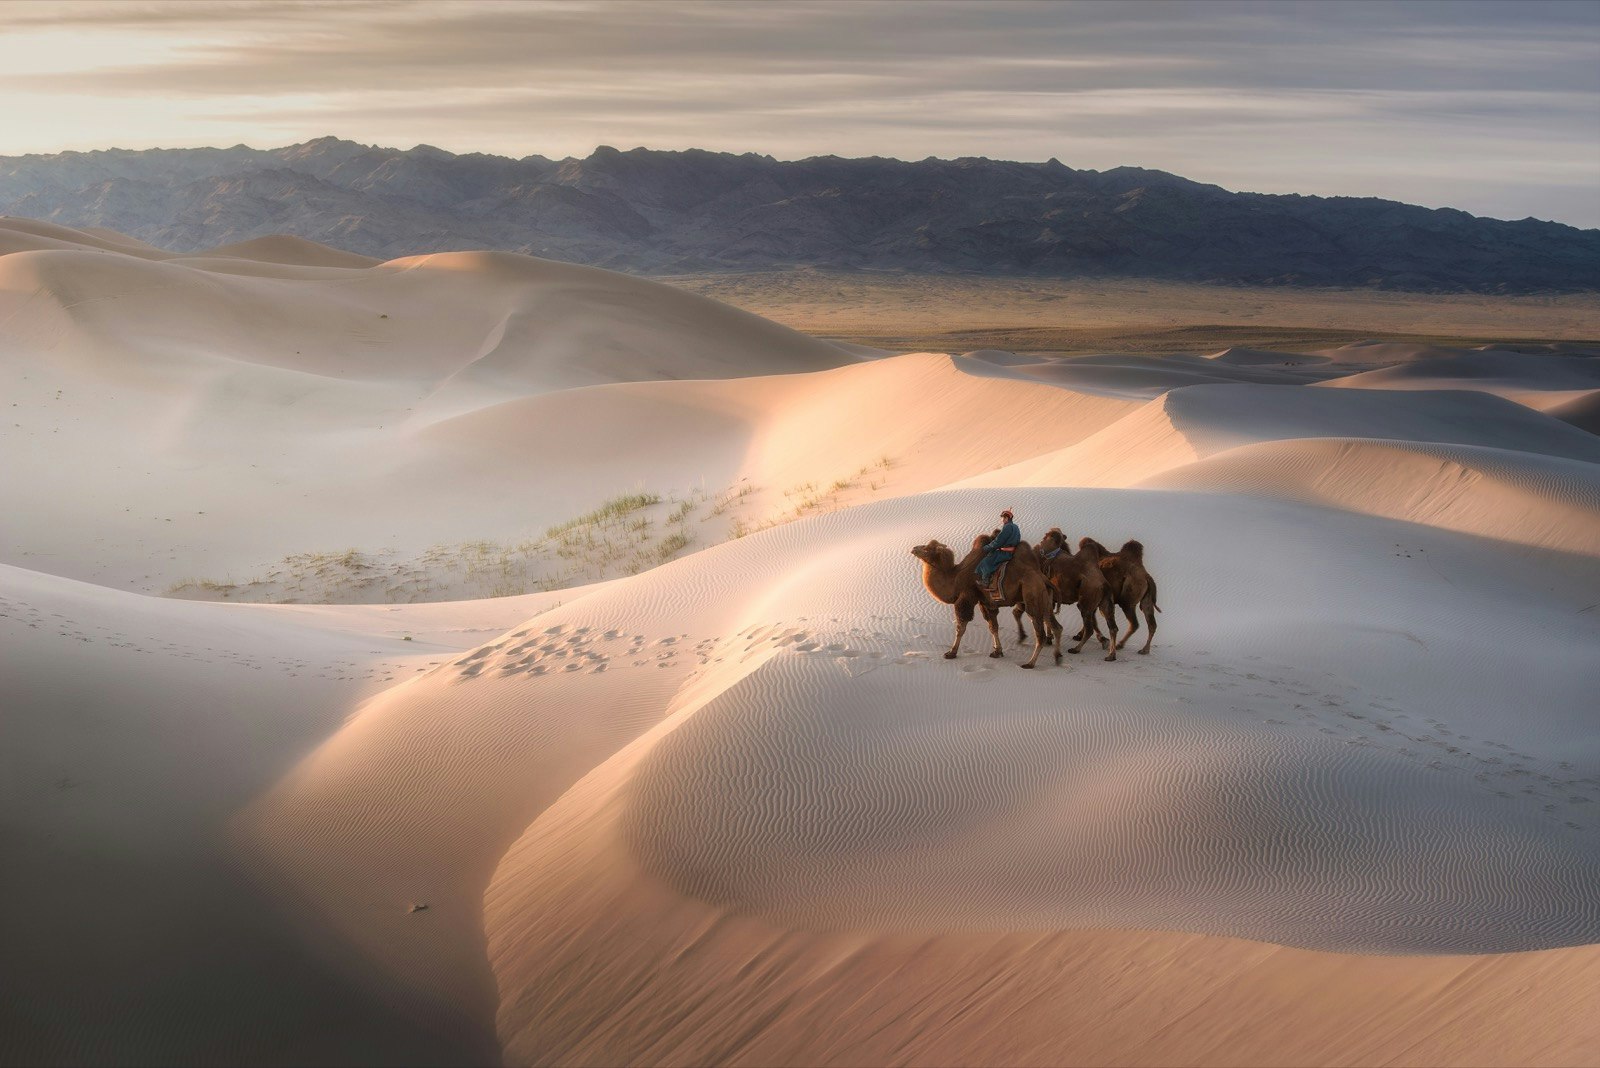 Four camels on a sand dune in the Gobi Desert with rolling sand dunes in the background